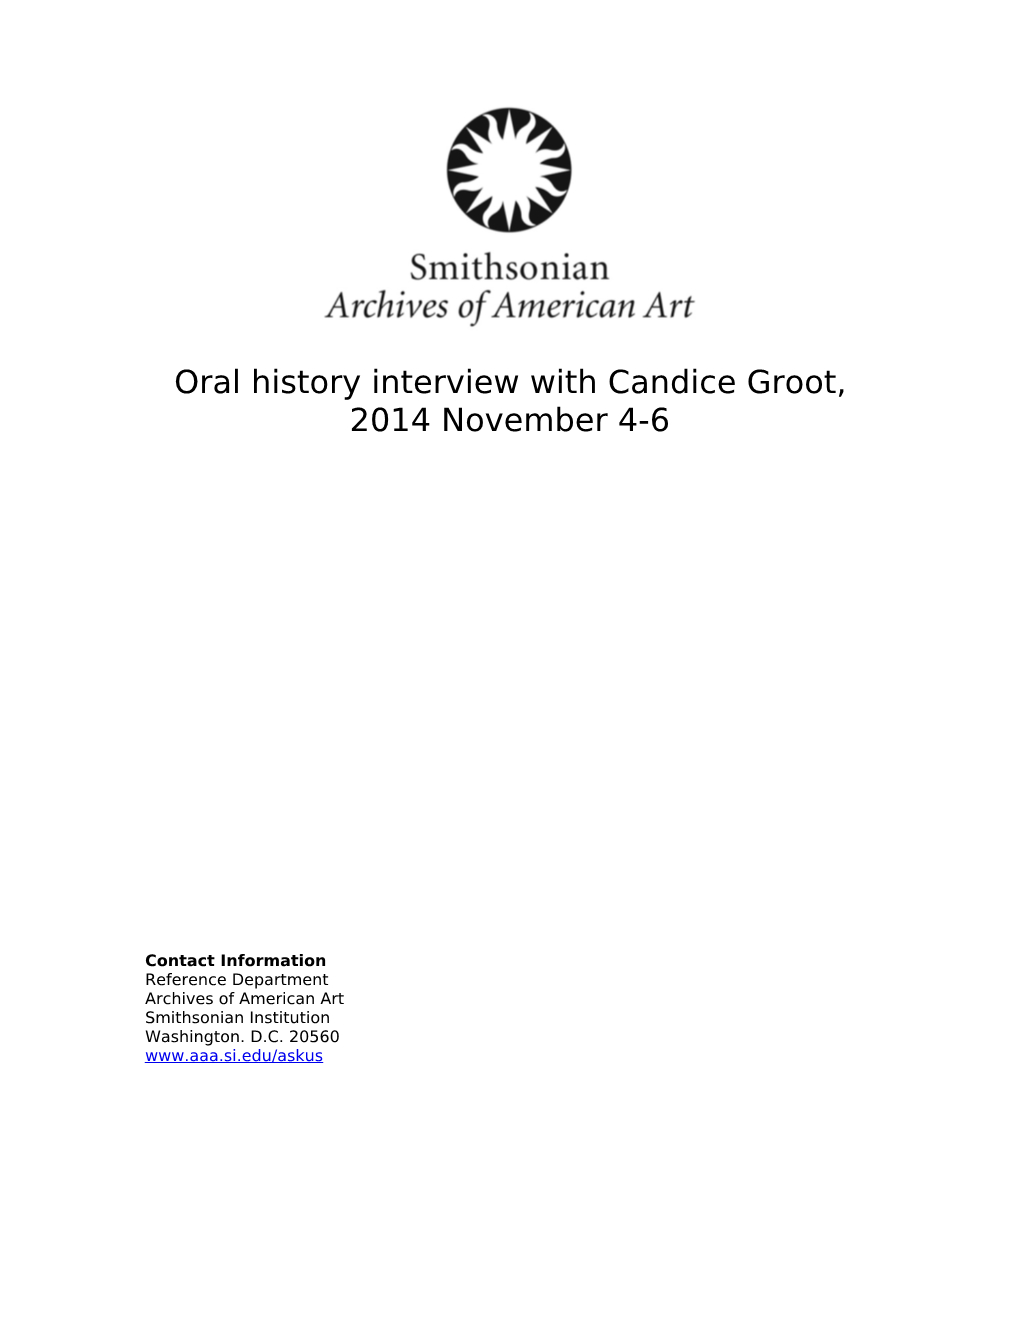 Oral History Interview with Candice Groot, 2014 November 4-6